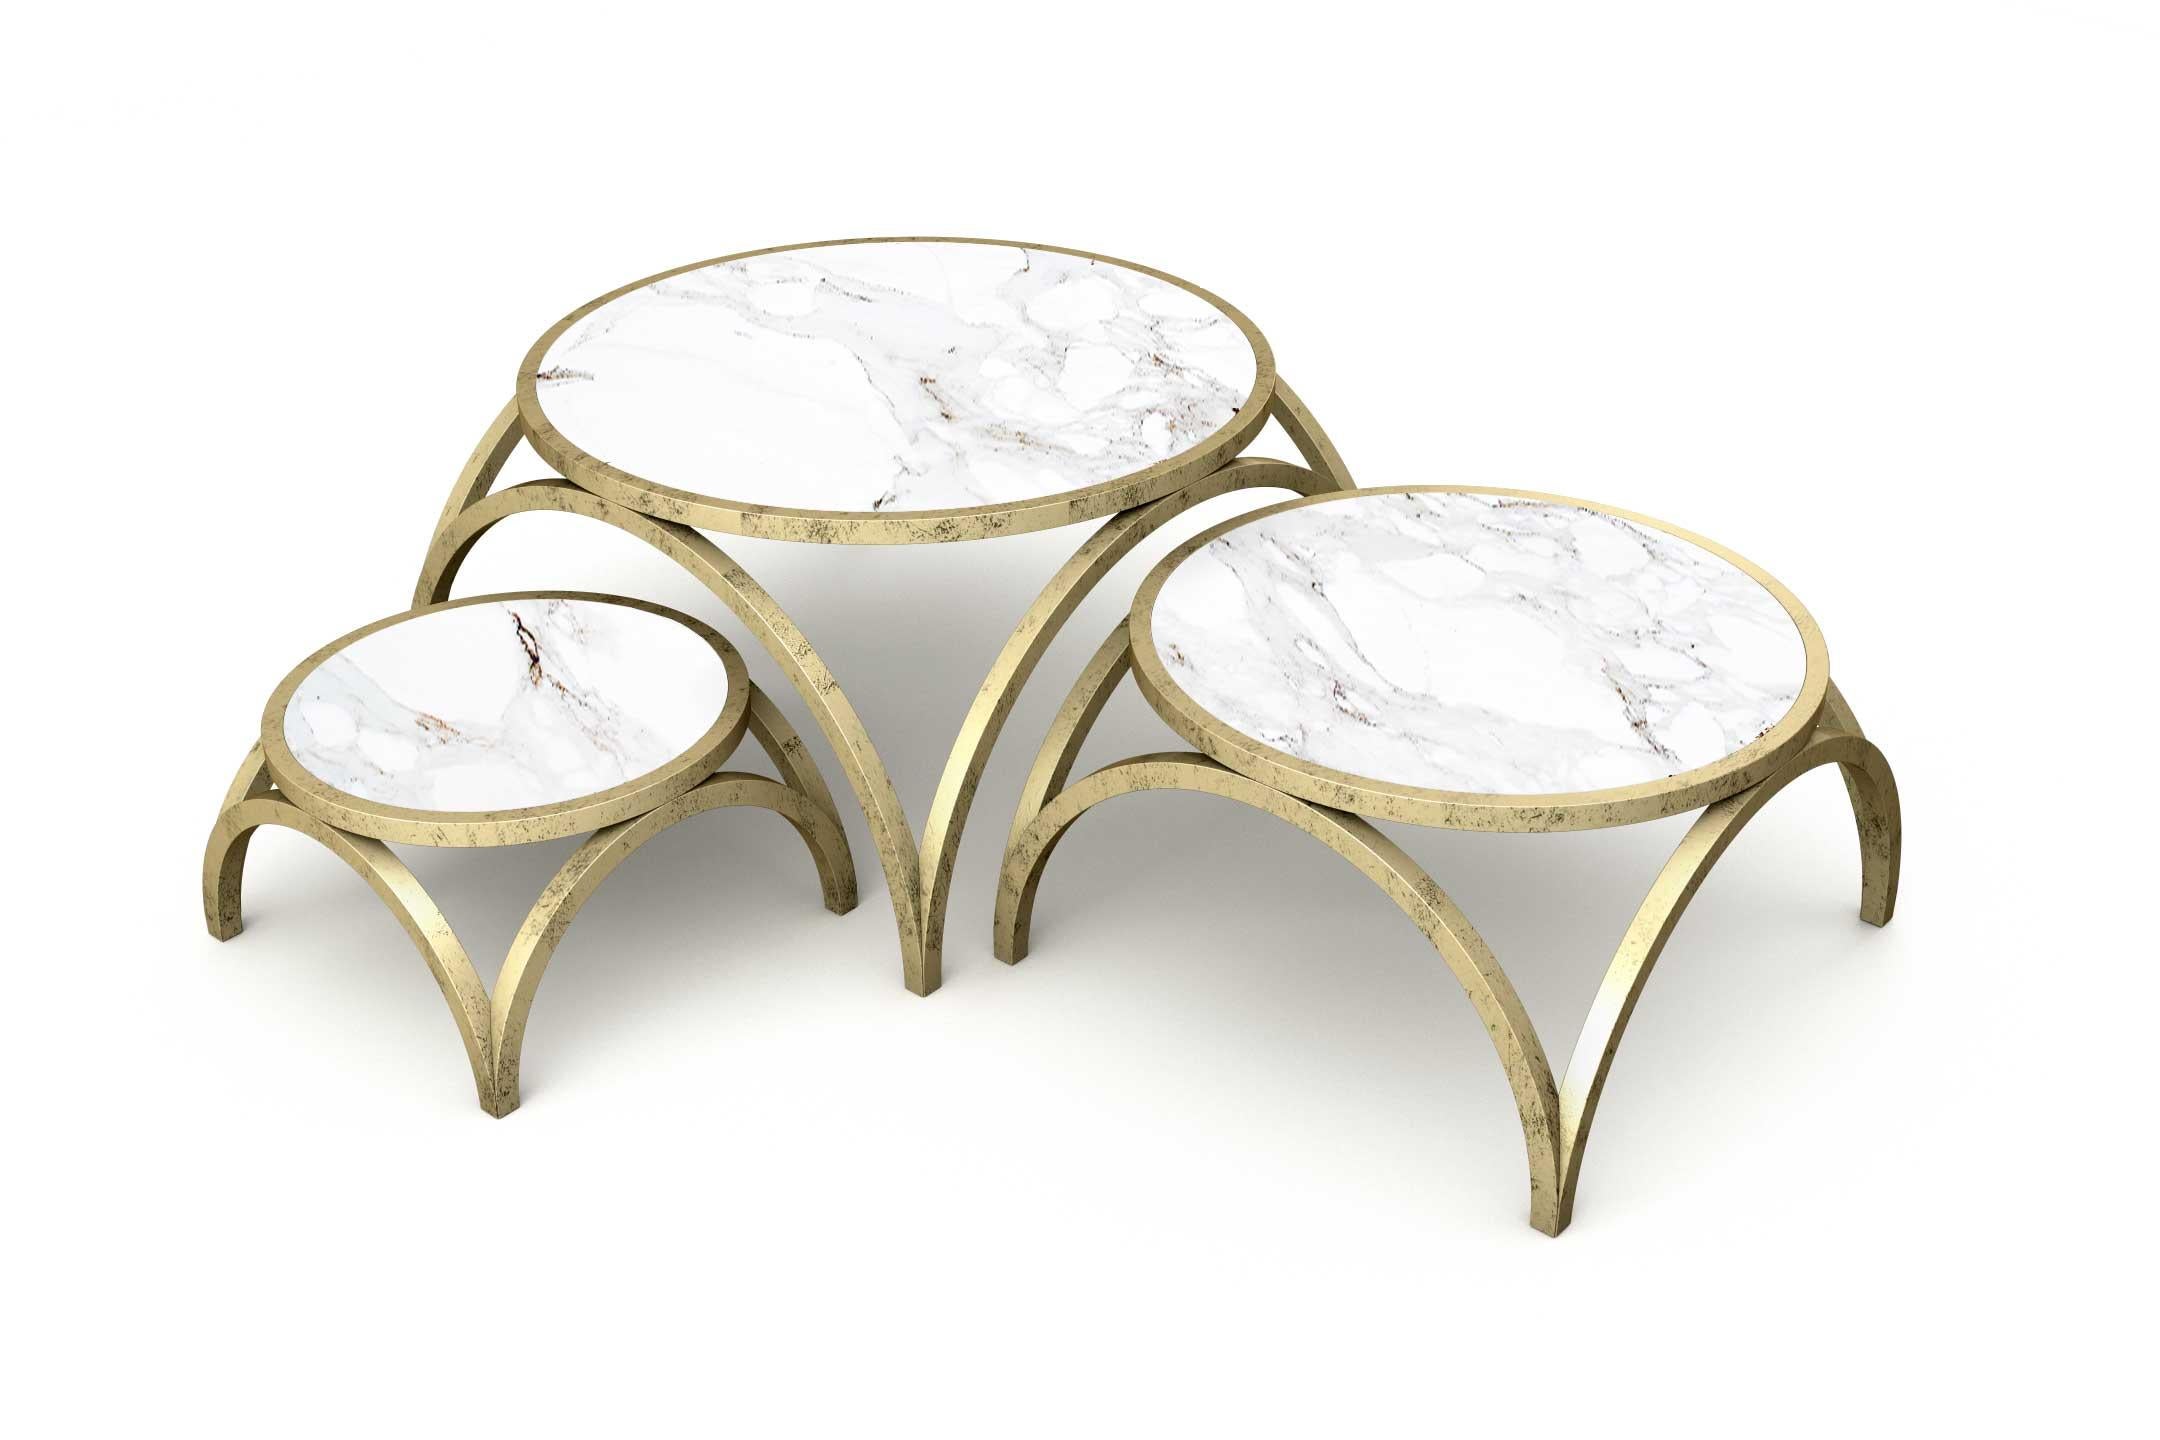 The Crescent collection is inspired by the graceful curvature of the antique arches, intertwined between them to bring its architectural majesty into our houses. It's a structure made of lacquered wood and brass legs that can be customized to order